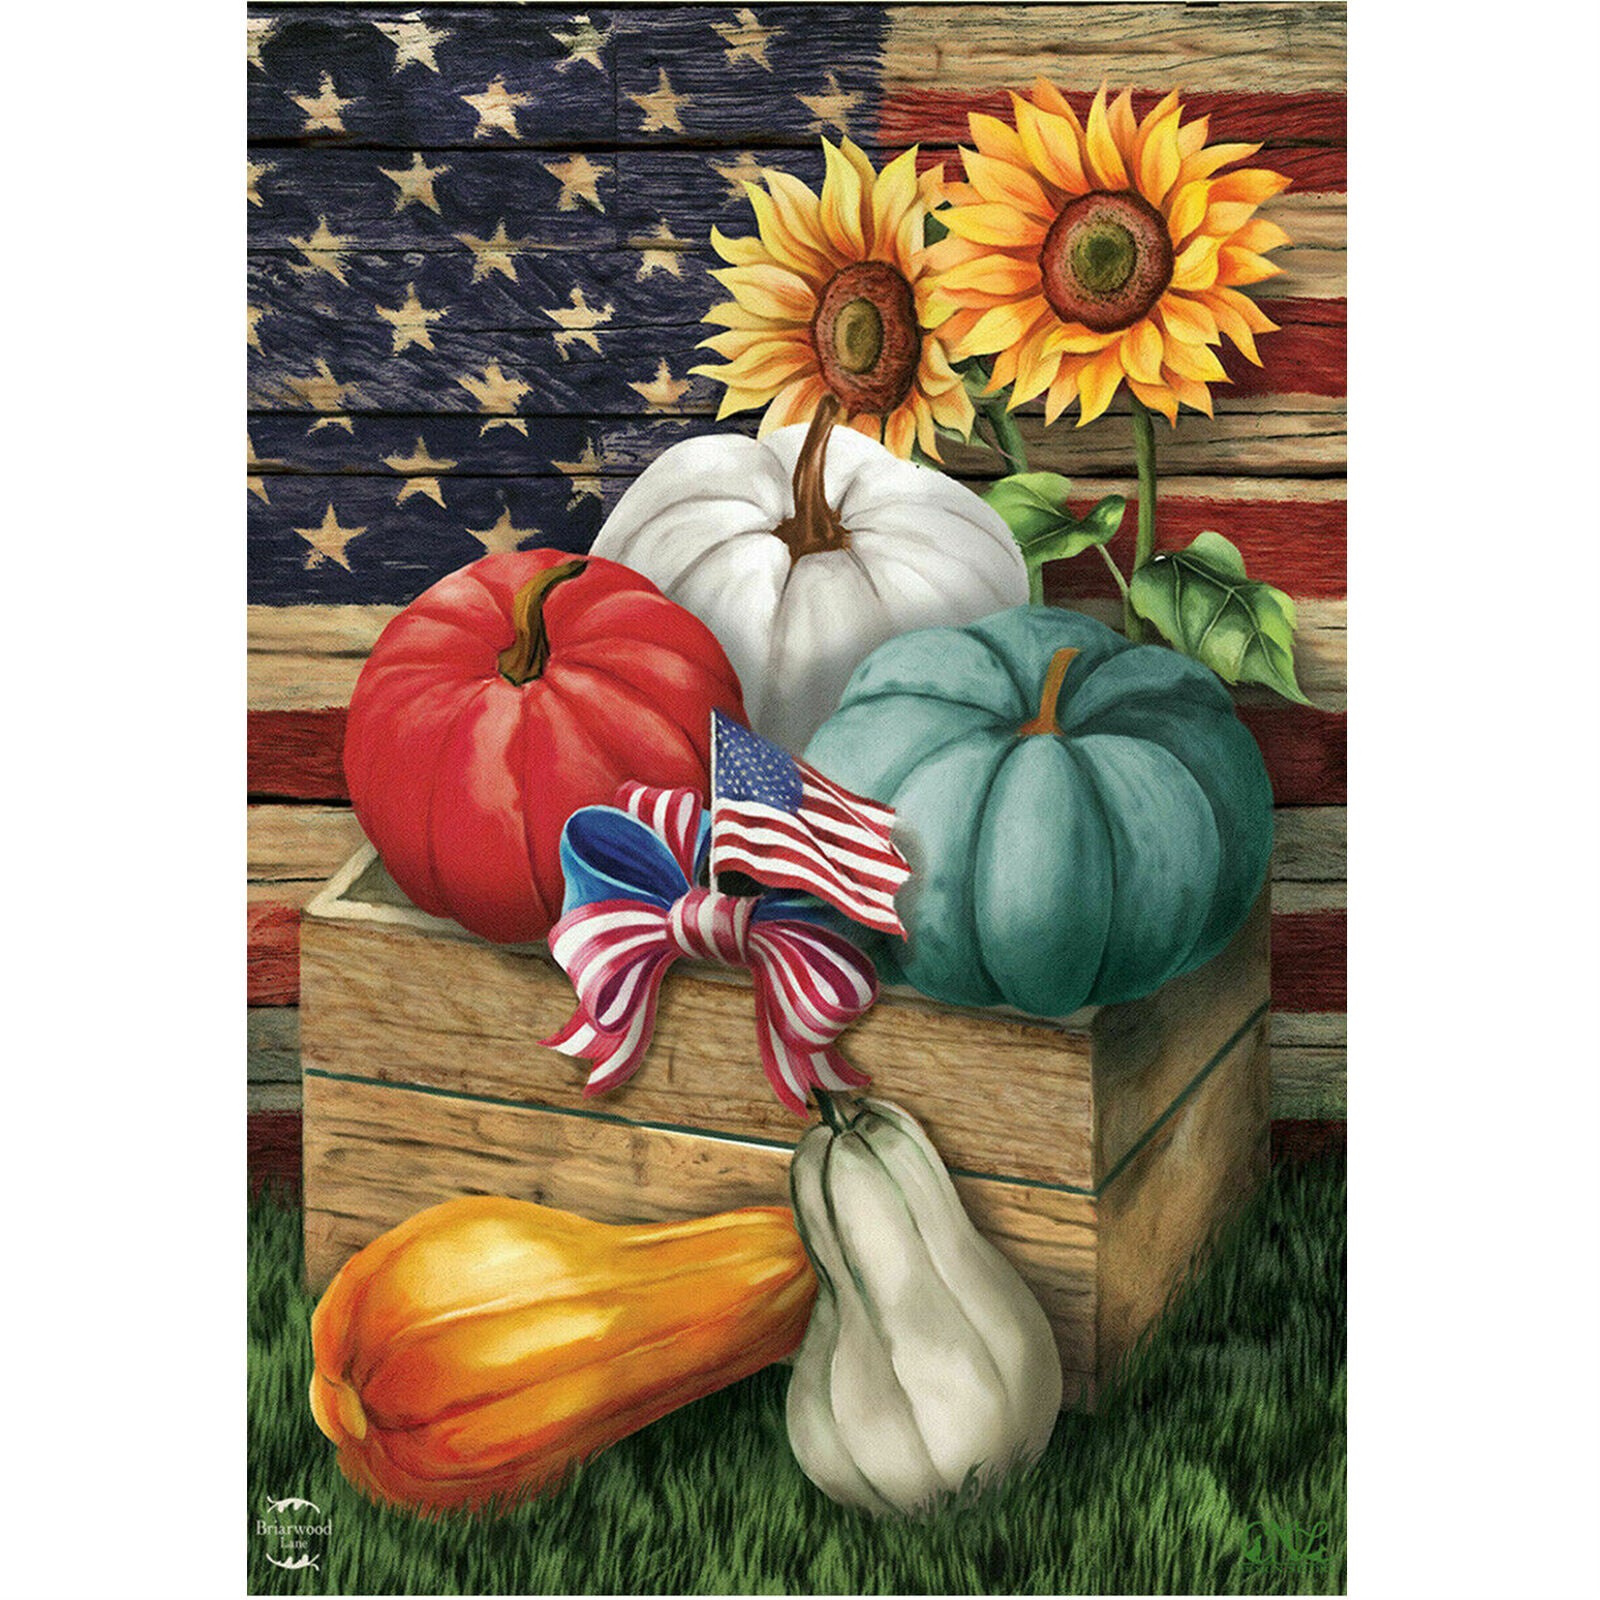 #122 AUTUMN FALL PATRIOTIC PUMPKINS SUNFLOWERS LARGE HOUSE FLAG 28X40 BANNER New